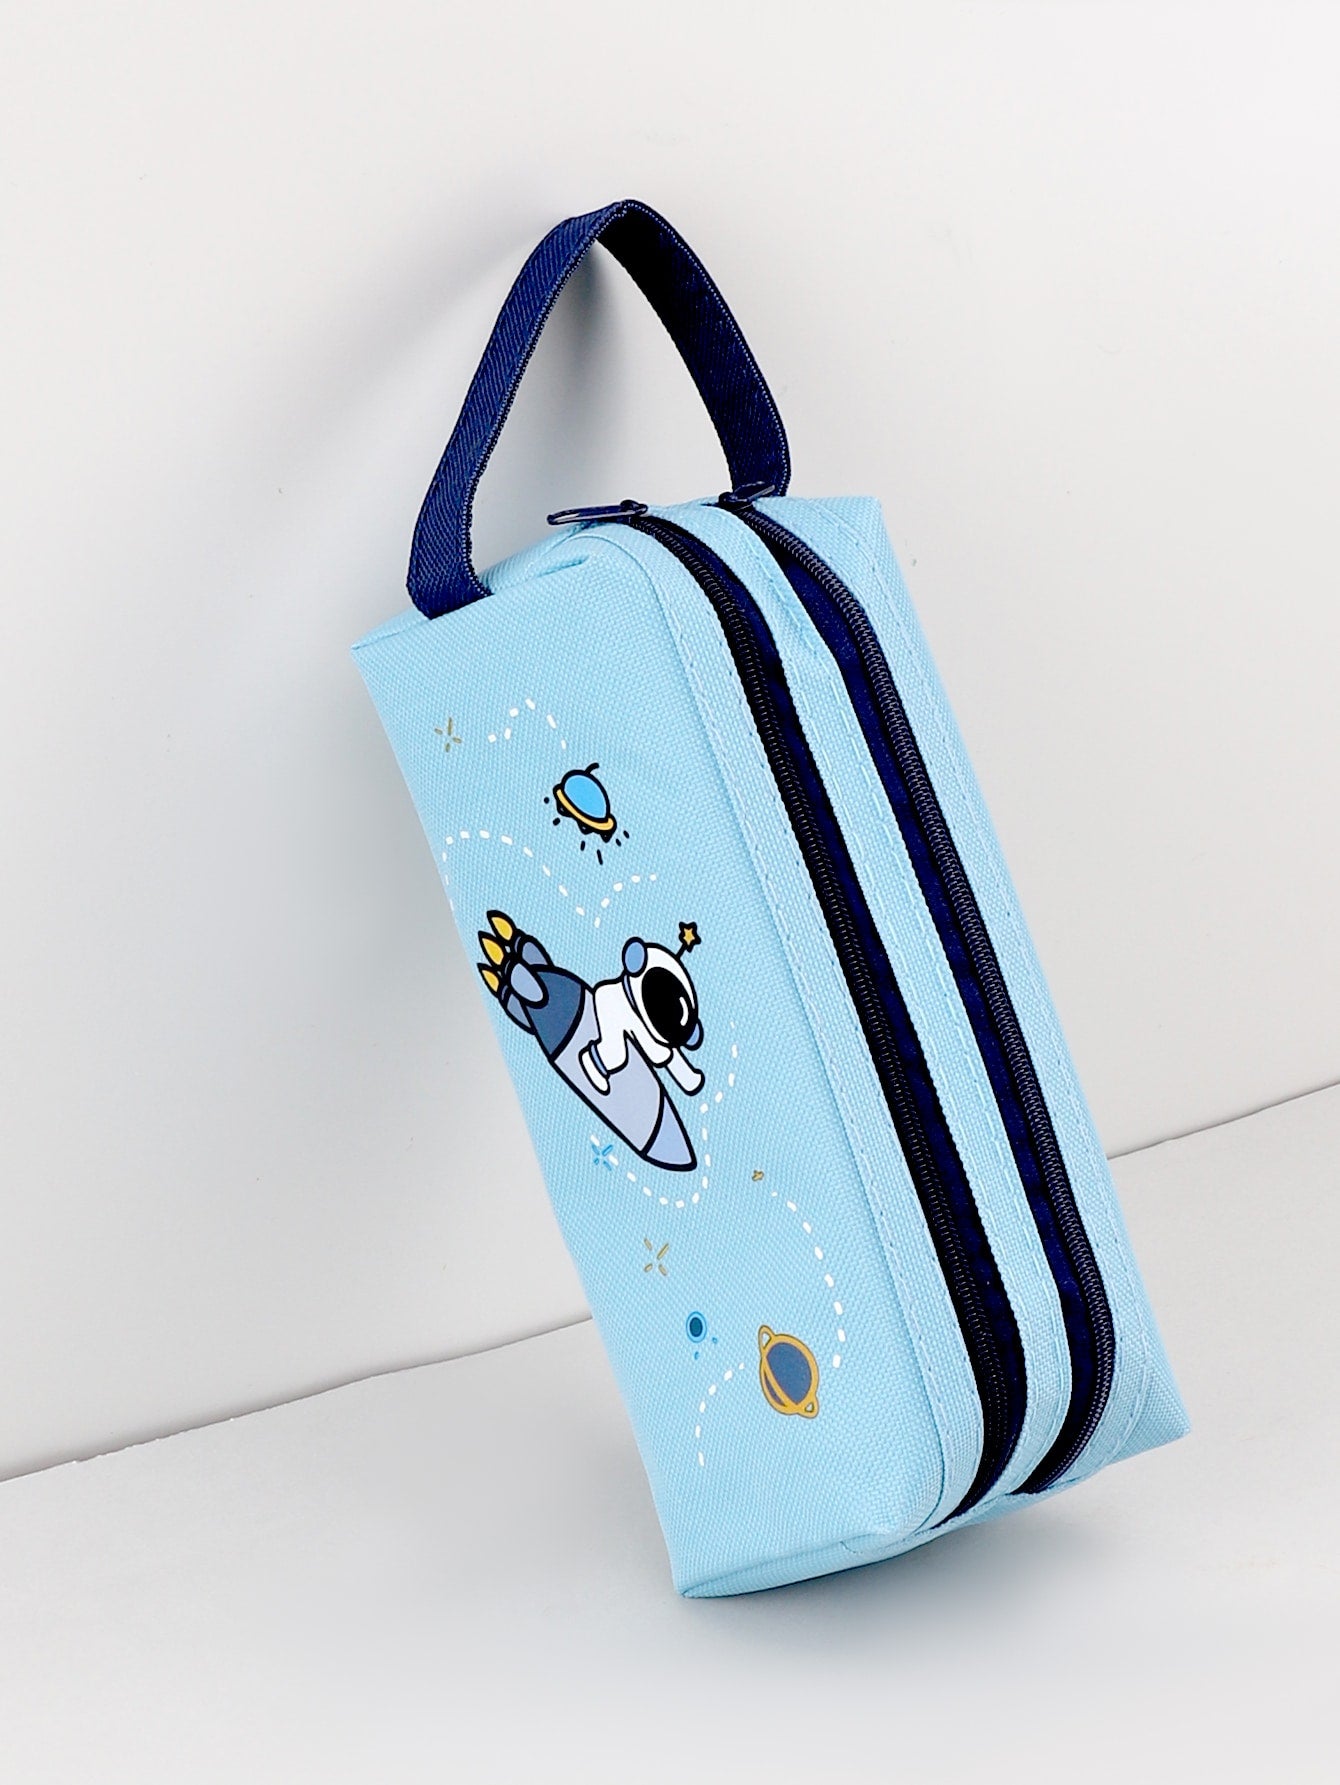 1pc Large Capacity Astronaut Themed Pencil Case With Dual Zippers